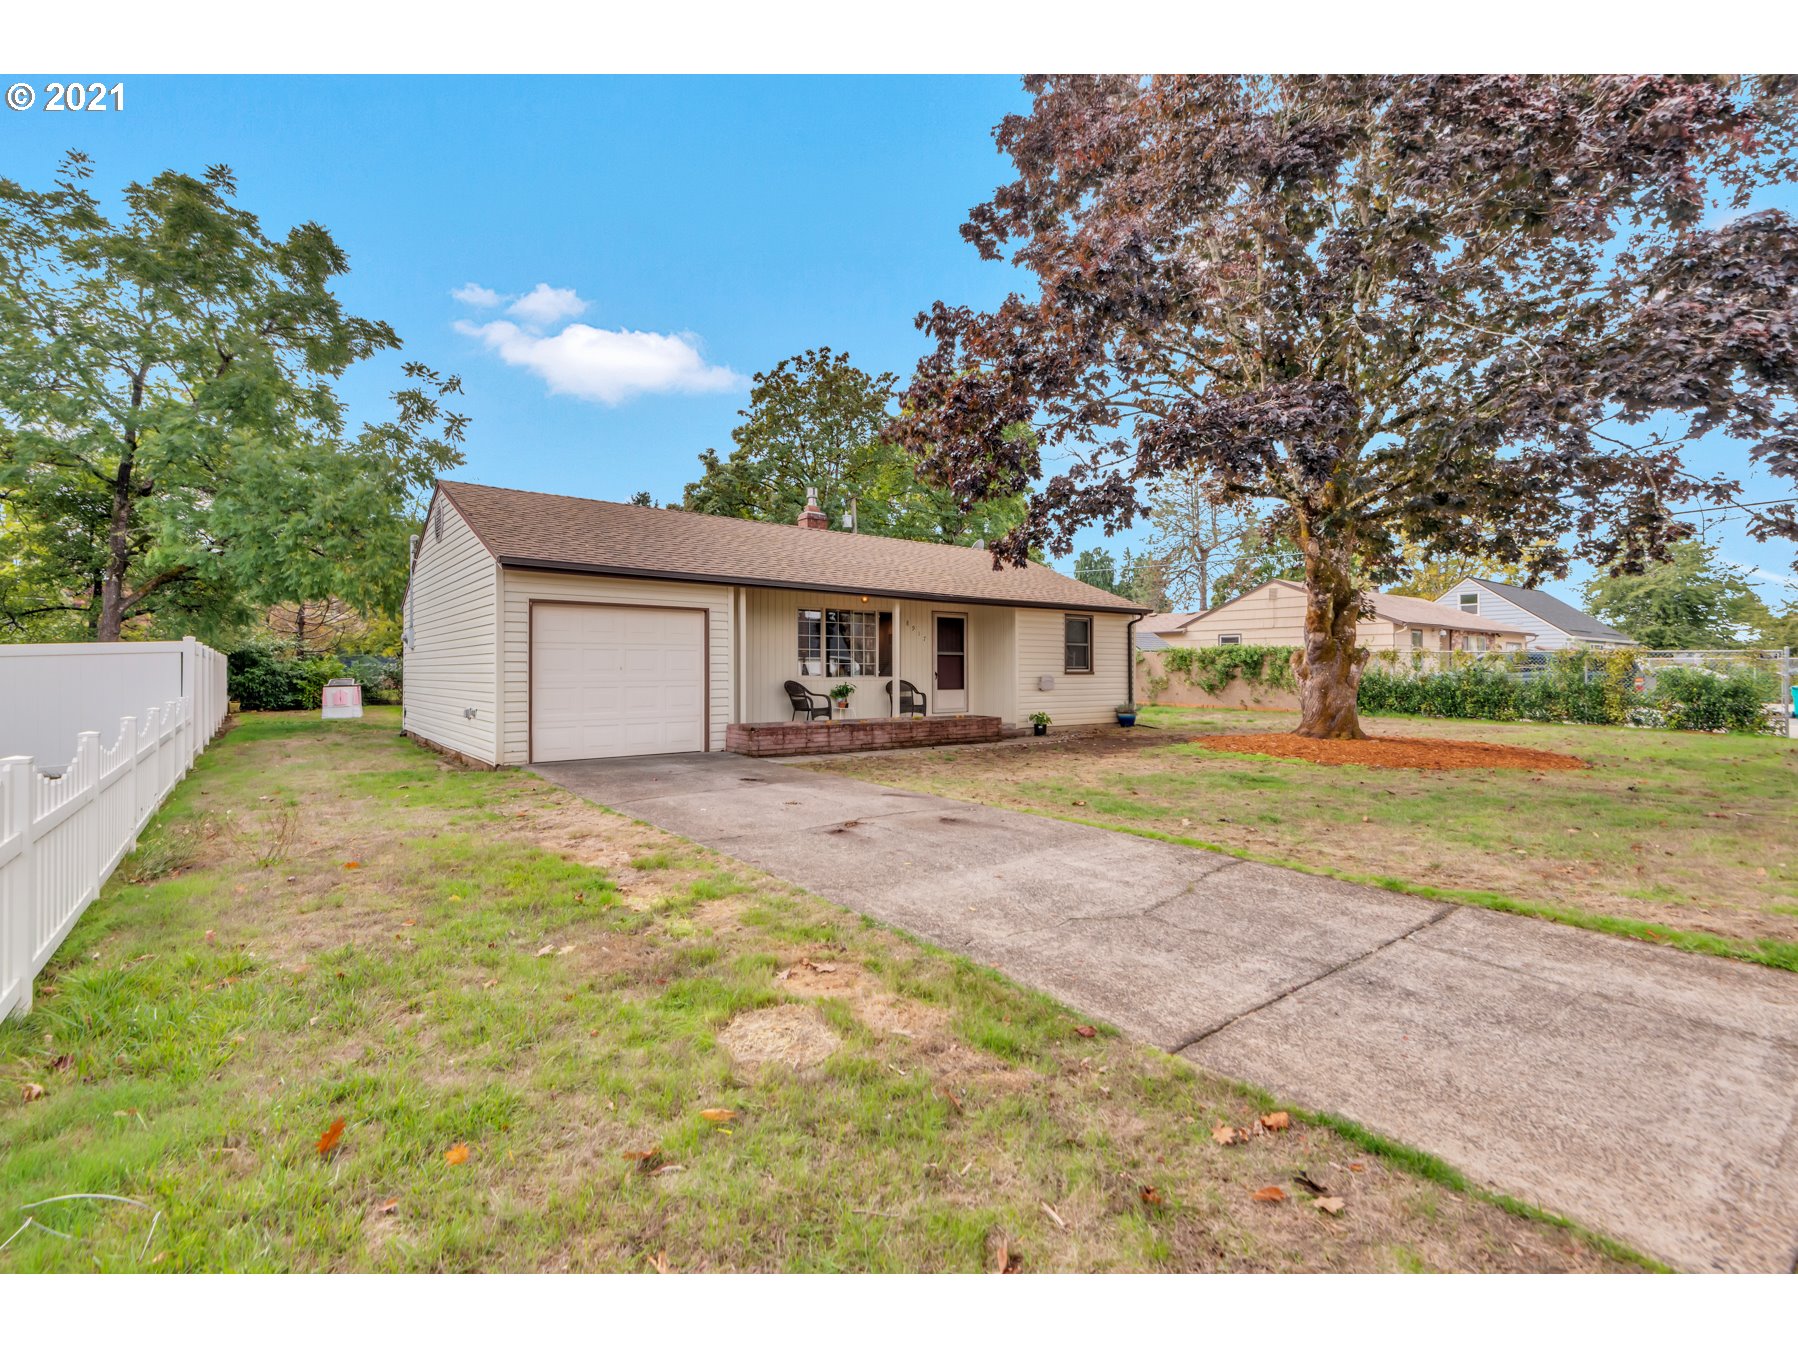 8917 SILVER STAR AVE (1 of 20)